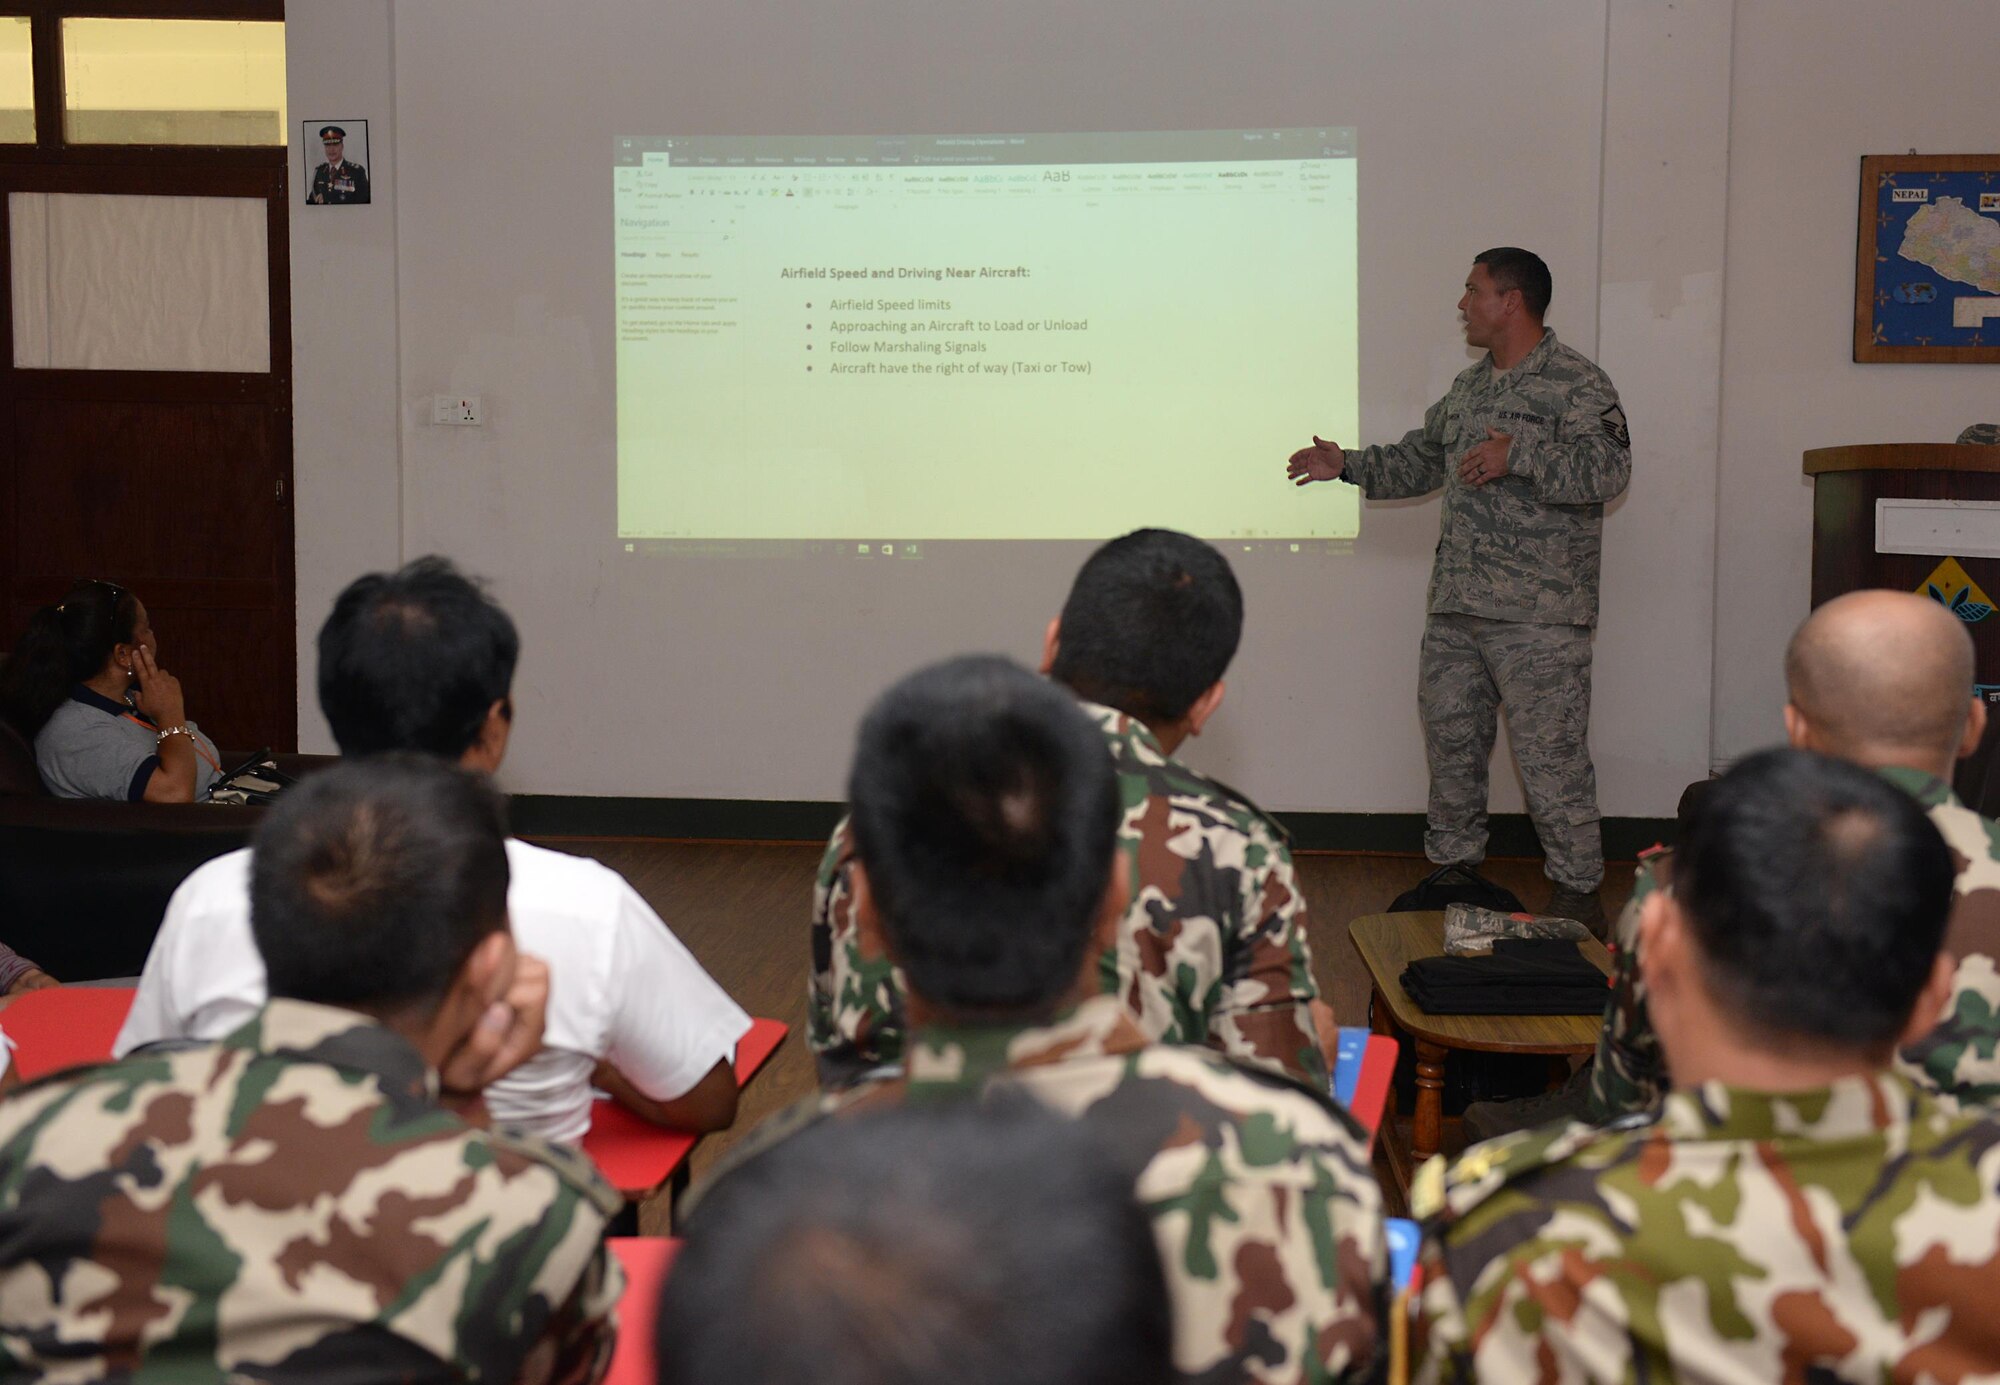 Master Sgt. Clint Hutchinson, 36th Contingency Response Group, briefs U.S. Airmen and Nepalese service members on airfield driving procedures during a subject-matter expert exchange on cargo handling June 28, 2016, at Tribhuvan International Airport in Kathmandu, Nepal. Ten Airmen from the 36th CRG and more than 20 participants from various Nepalese organizations exchanged knowledge on all elements of cargo handling. (U.S. Air Force photo by Staff Sgt. Benjamin Gonsier/Released)